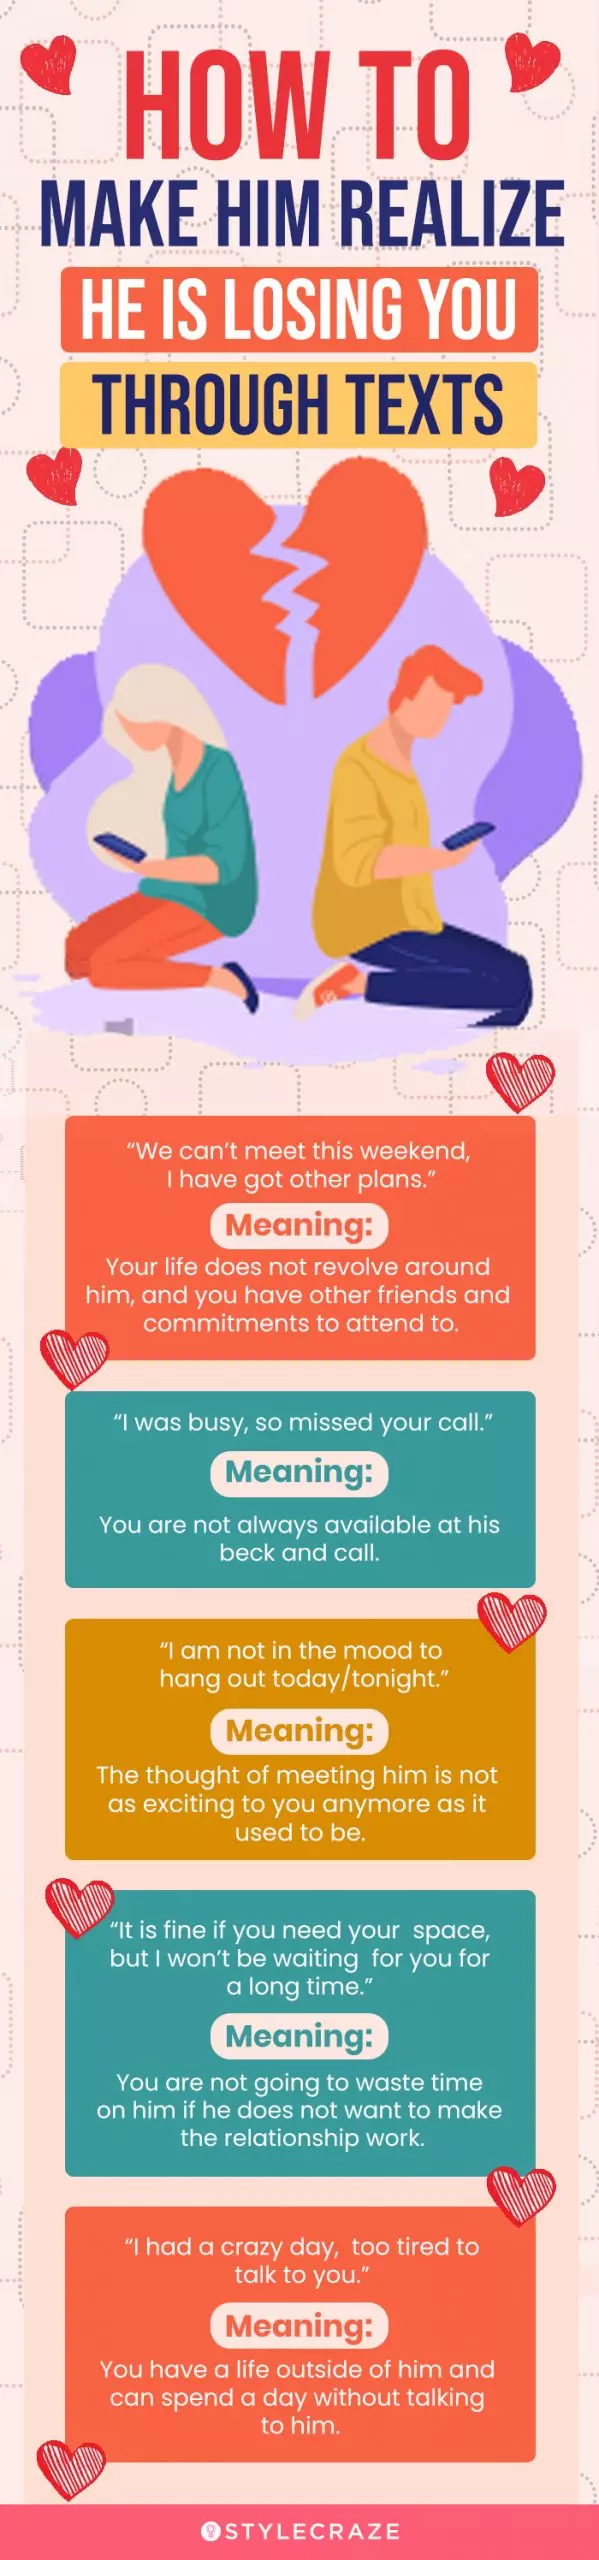 he is losing you throught text (infographic)